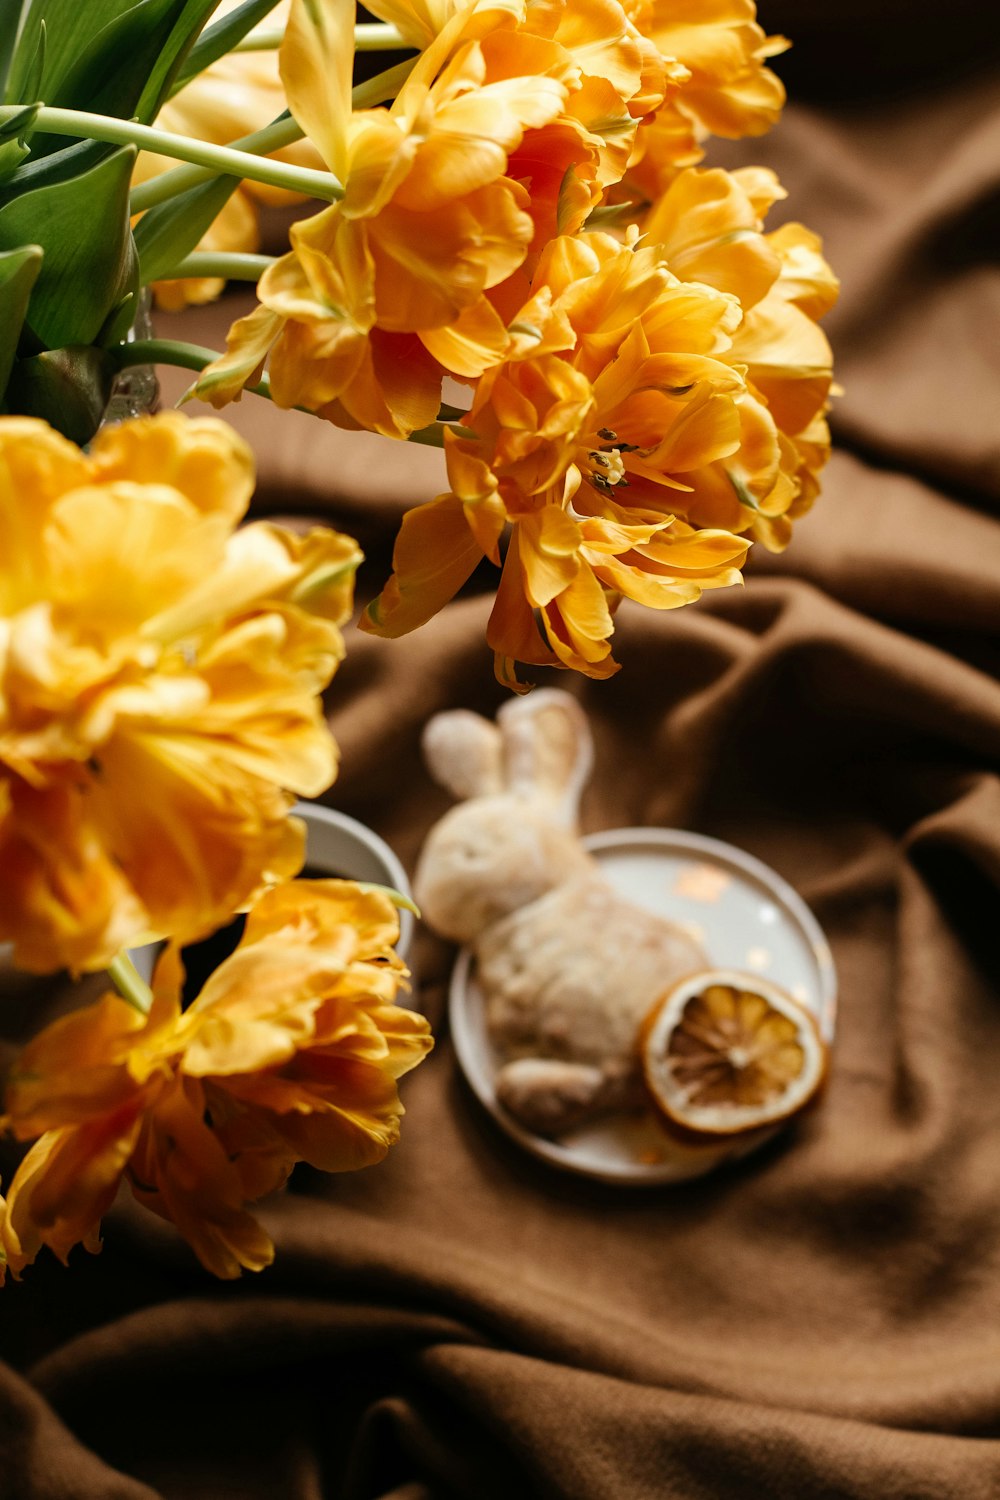 yellow flowers and a plate of food on a brown cloth